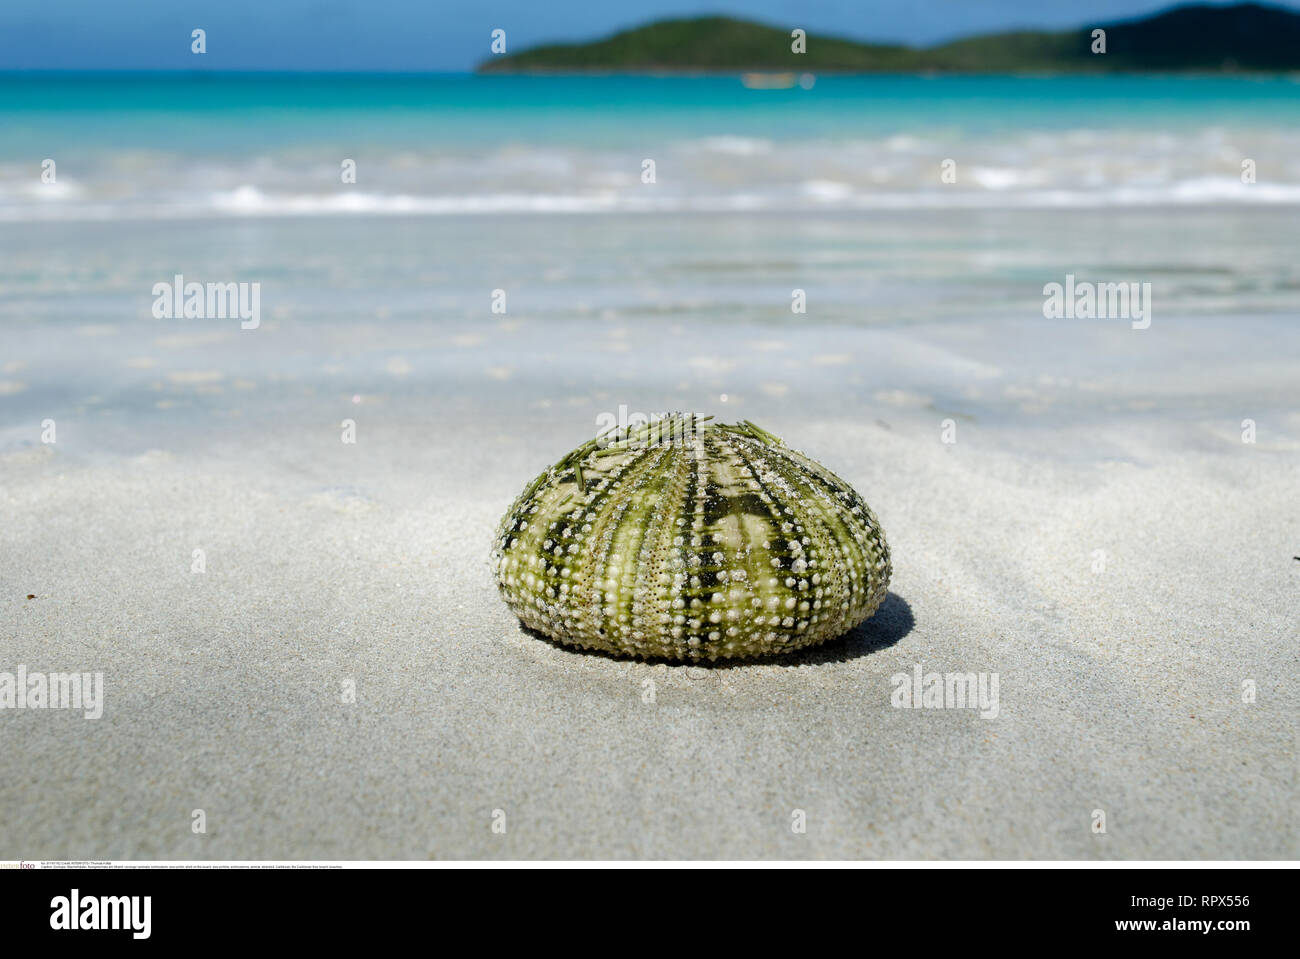 zoology / animals, echinoderm, sea urchin, s, Caution! For Greetingcard-Use / Postcard-Use In German Speaking Countries Certain Restrictions May Apply Stock Photo